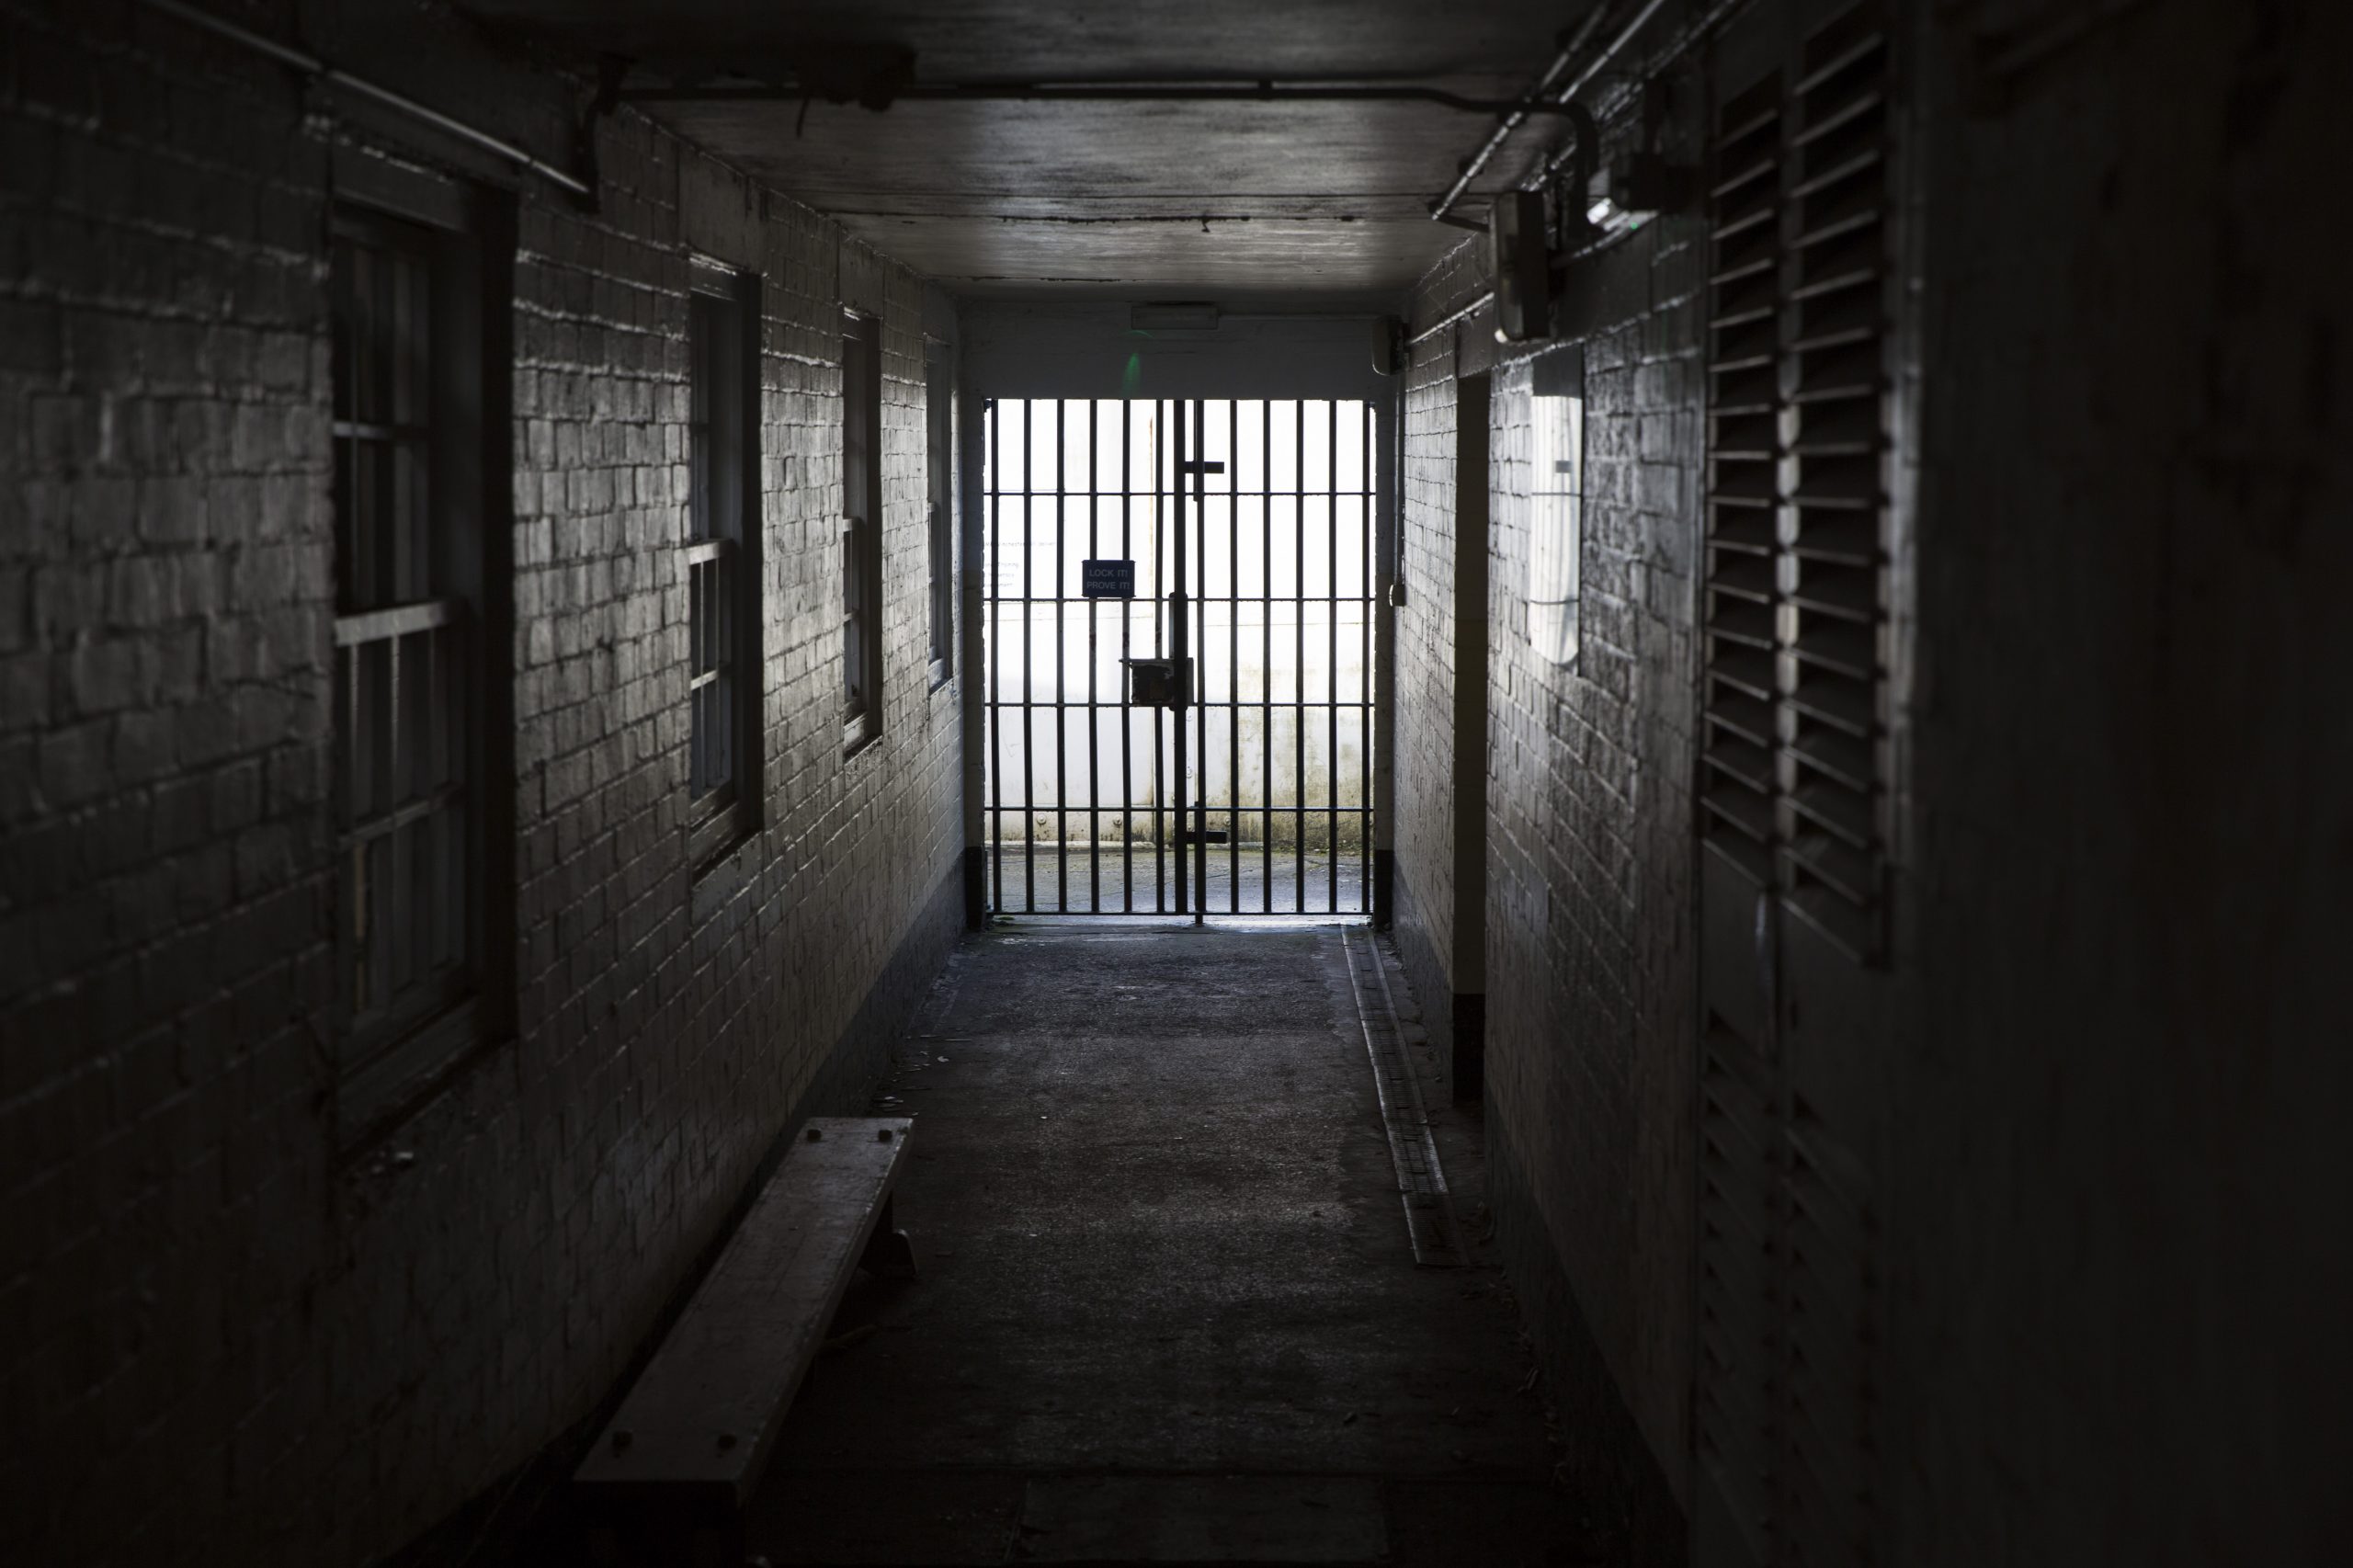 The number of prison deaths up by 70% over last three months